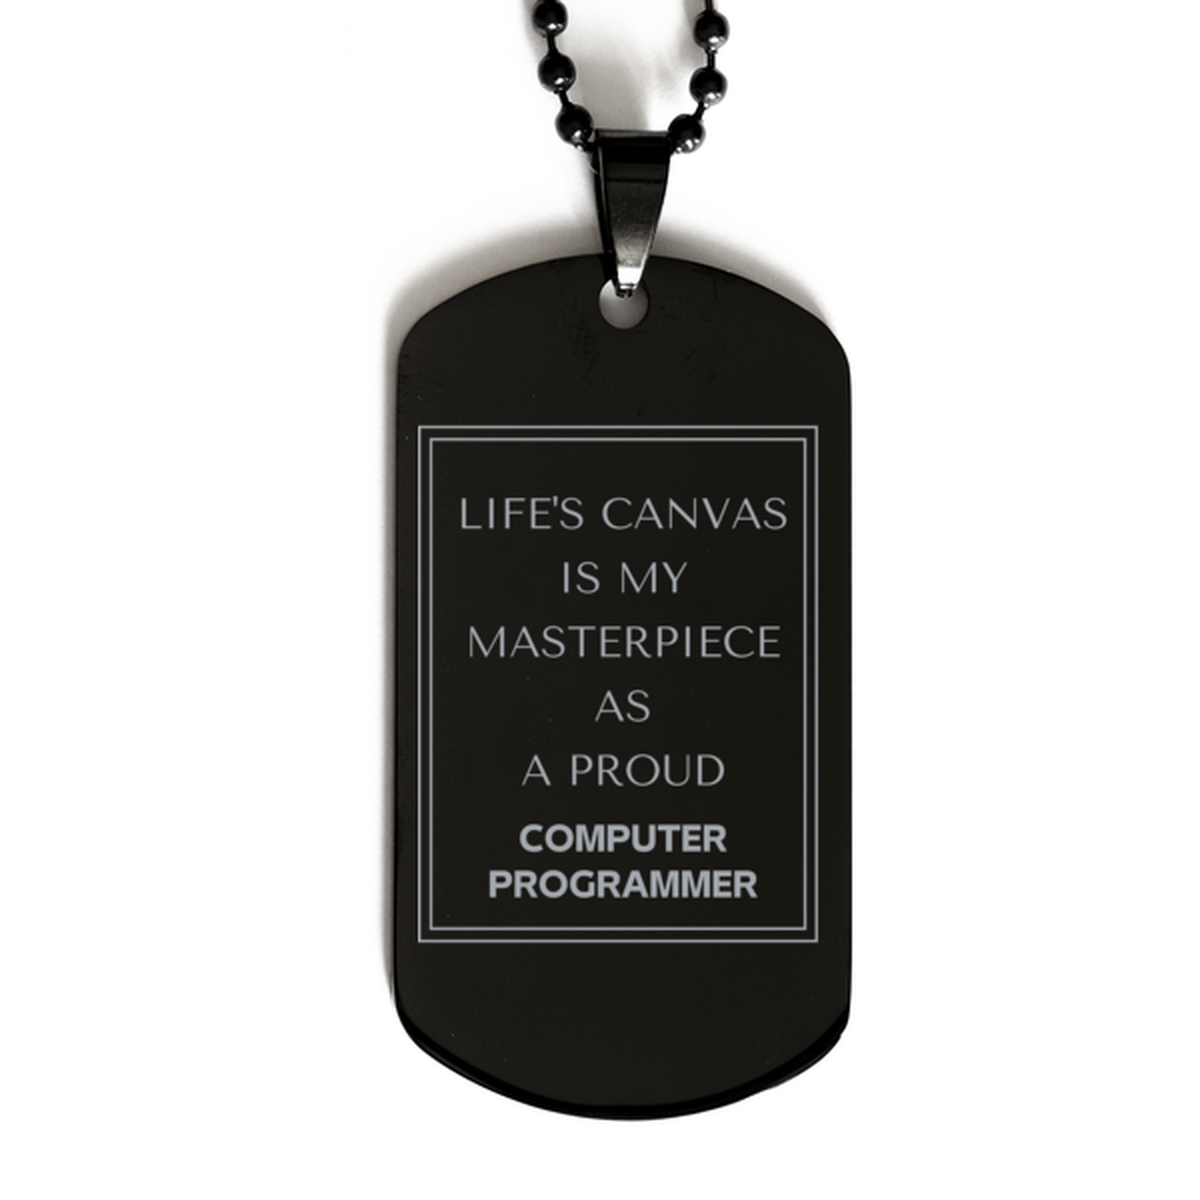 Proud Computer Programmer Gifts, Life's canvas is my masterpiece, Epic Birthday Christmas Unique Black Dog Tag For Computer Programmer, Coworkers, Men, Women, Friends